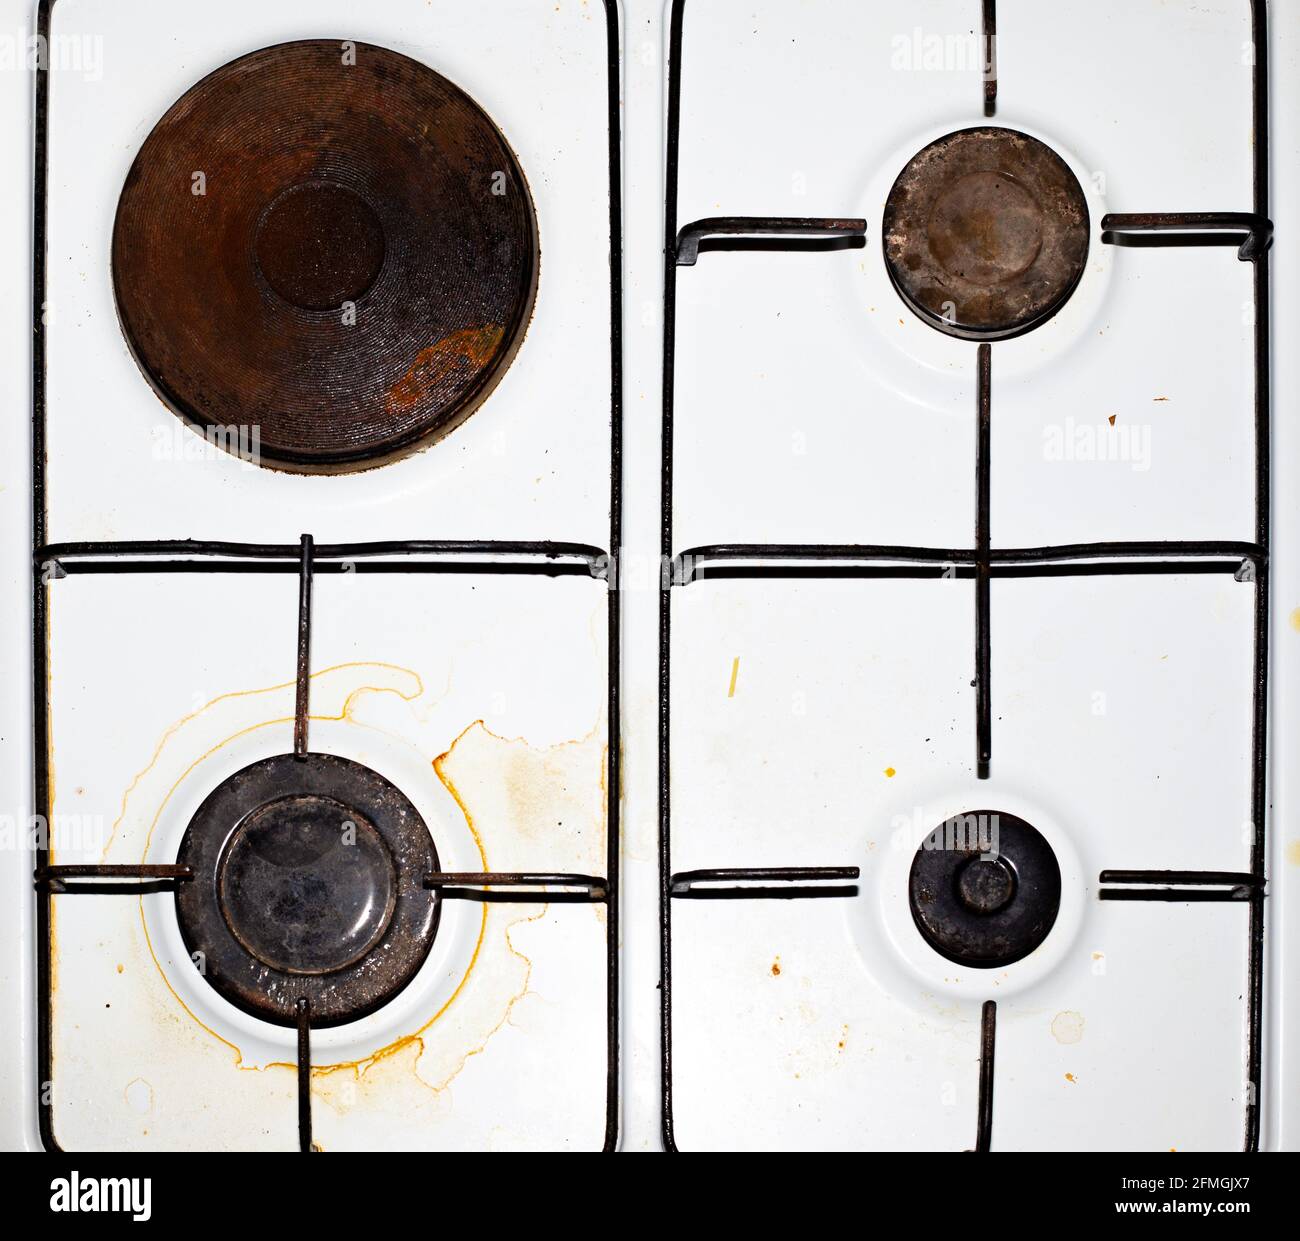 https://c8.alamy.com/comp/2FMGJX7/dirty-metal-plate-the-burners-of-the-electric-and-gas-combination-hob-become-covered-with-dirt-and-grease-after-cooking-view-from-above-2FMGJX7.jpg